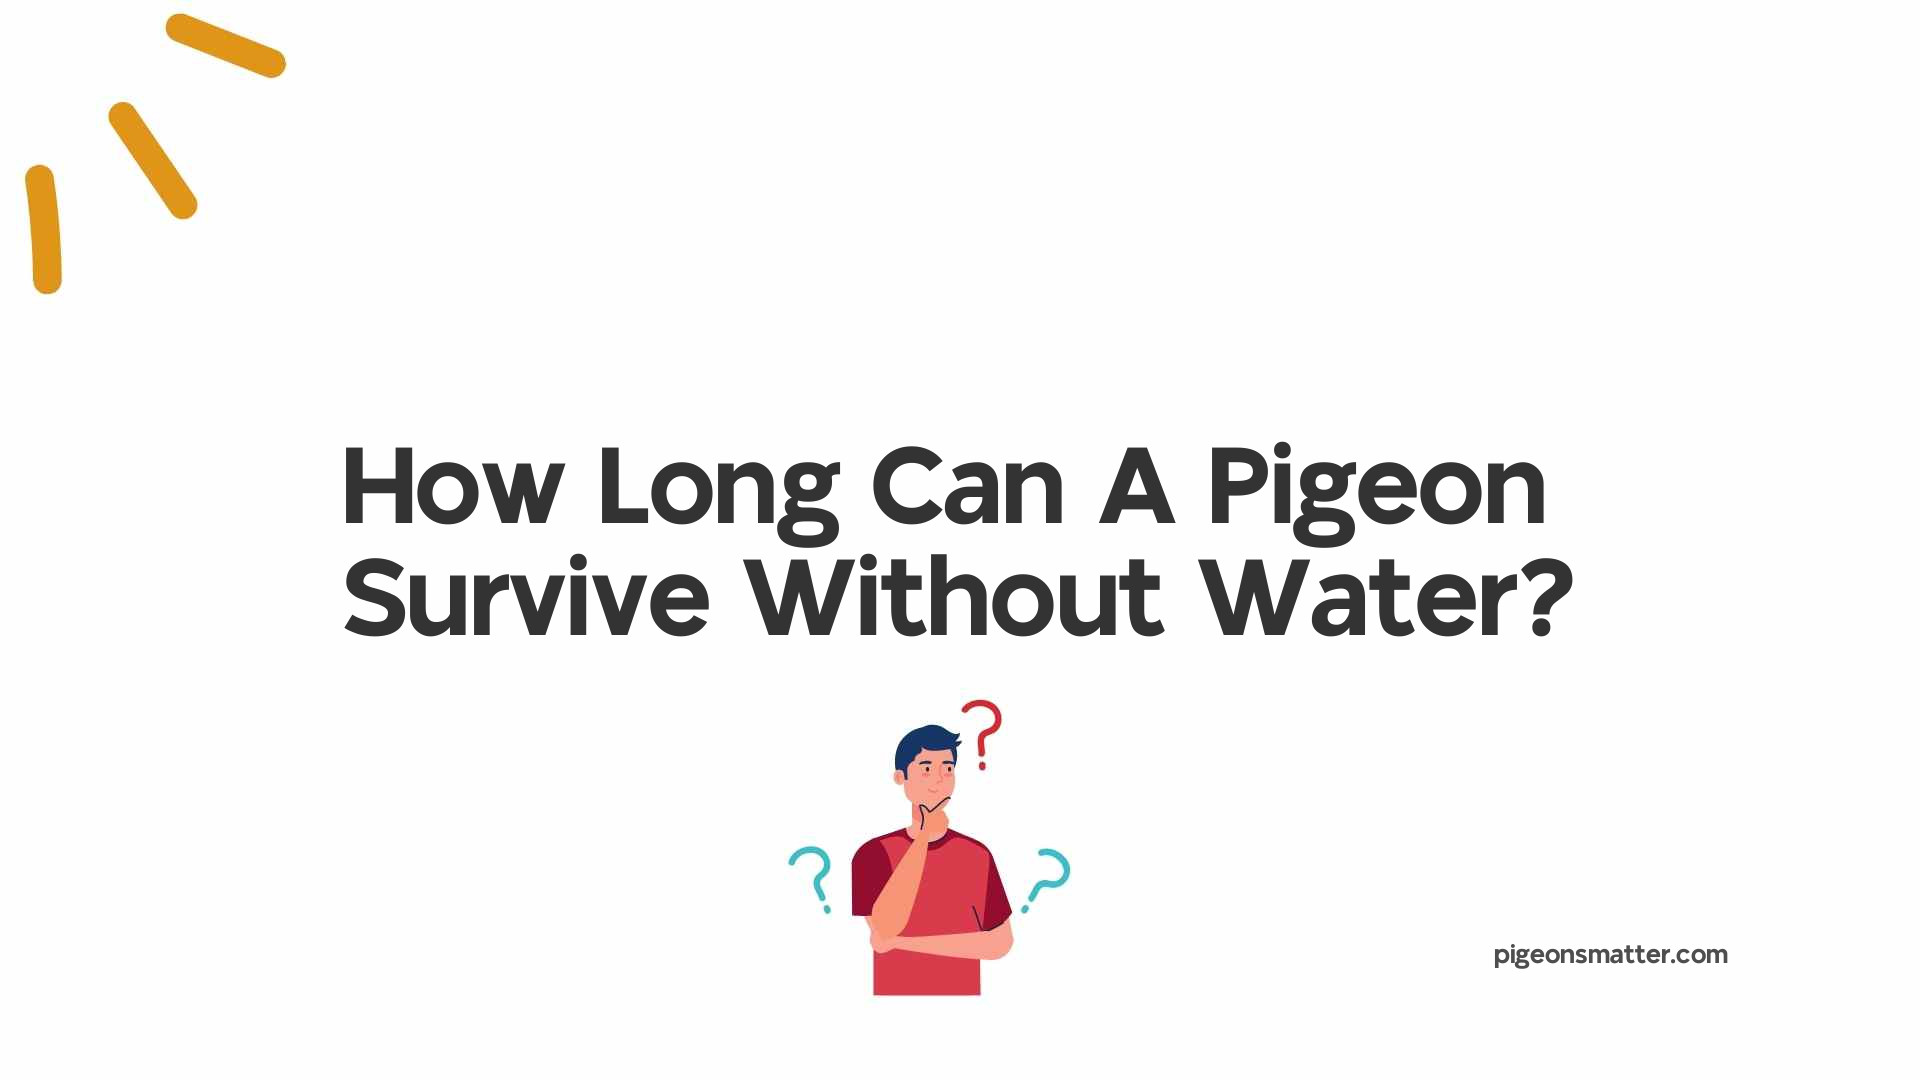 How Long Can A Pigeon Survive Without Water?